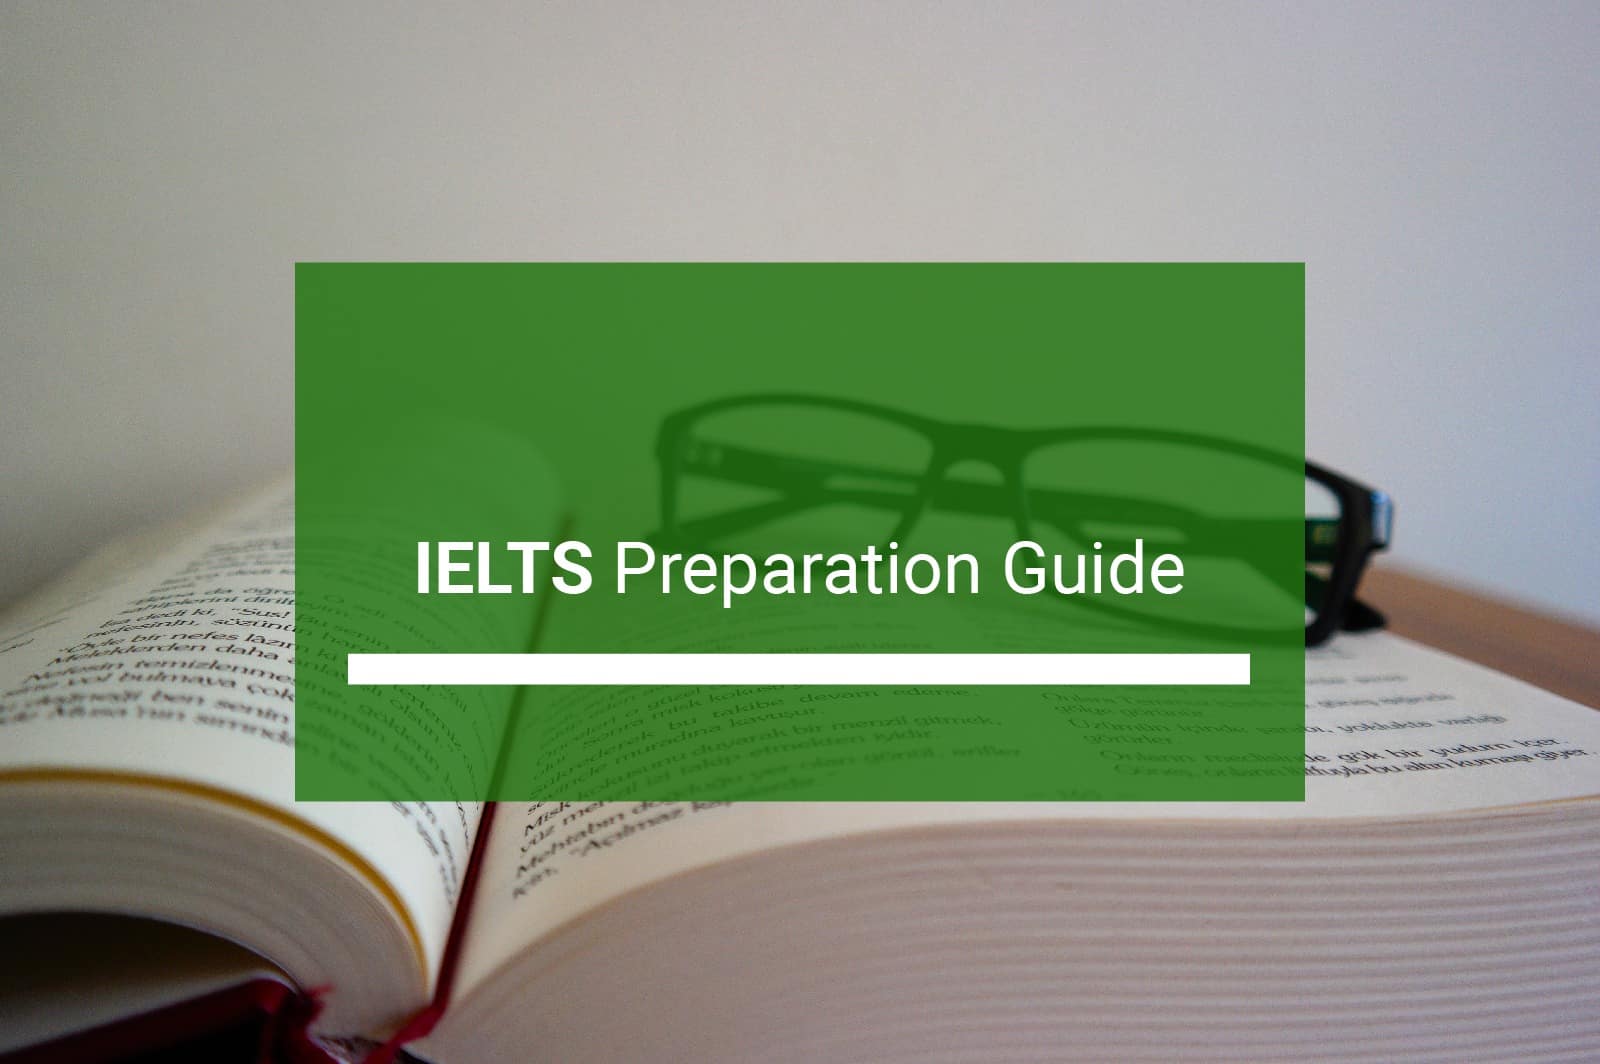 How to clear IELTS exam in 30 days